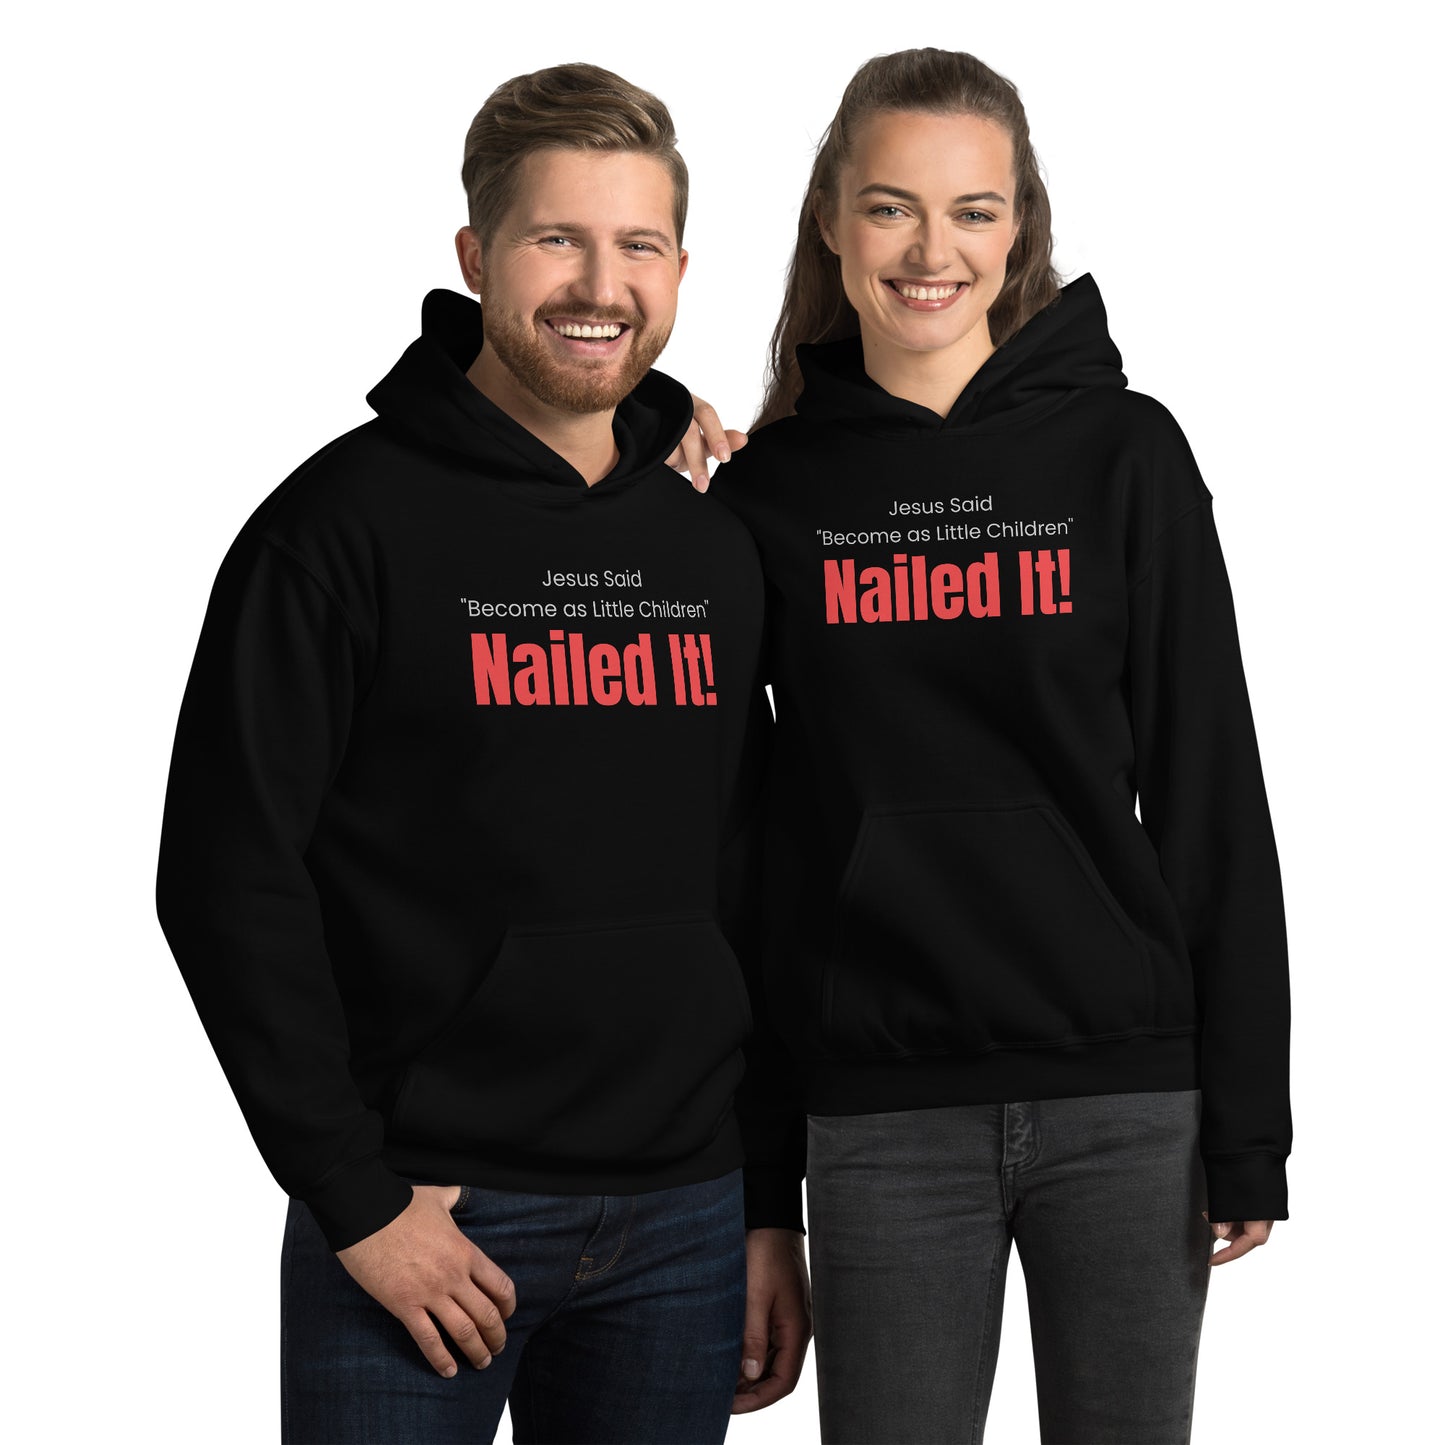 Jesus Said Become as Little Children NAILED IT Unisex Hoodie